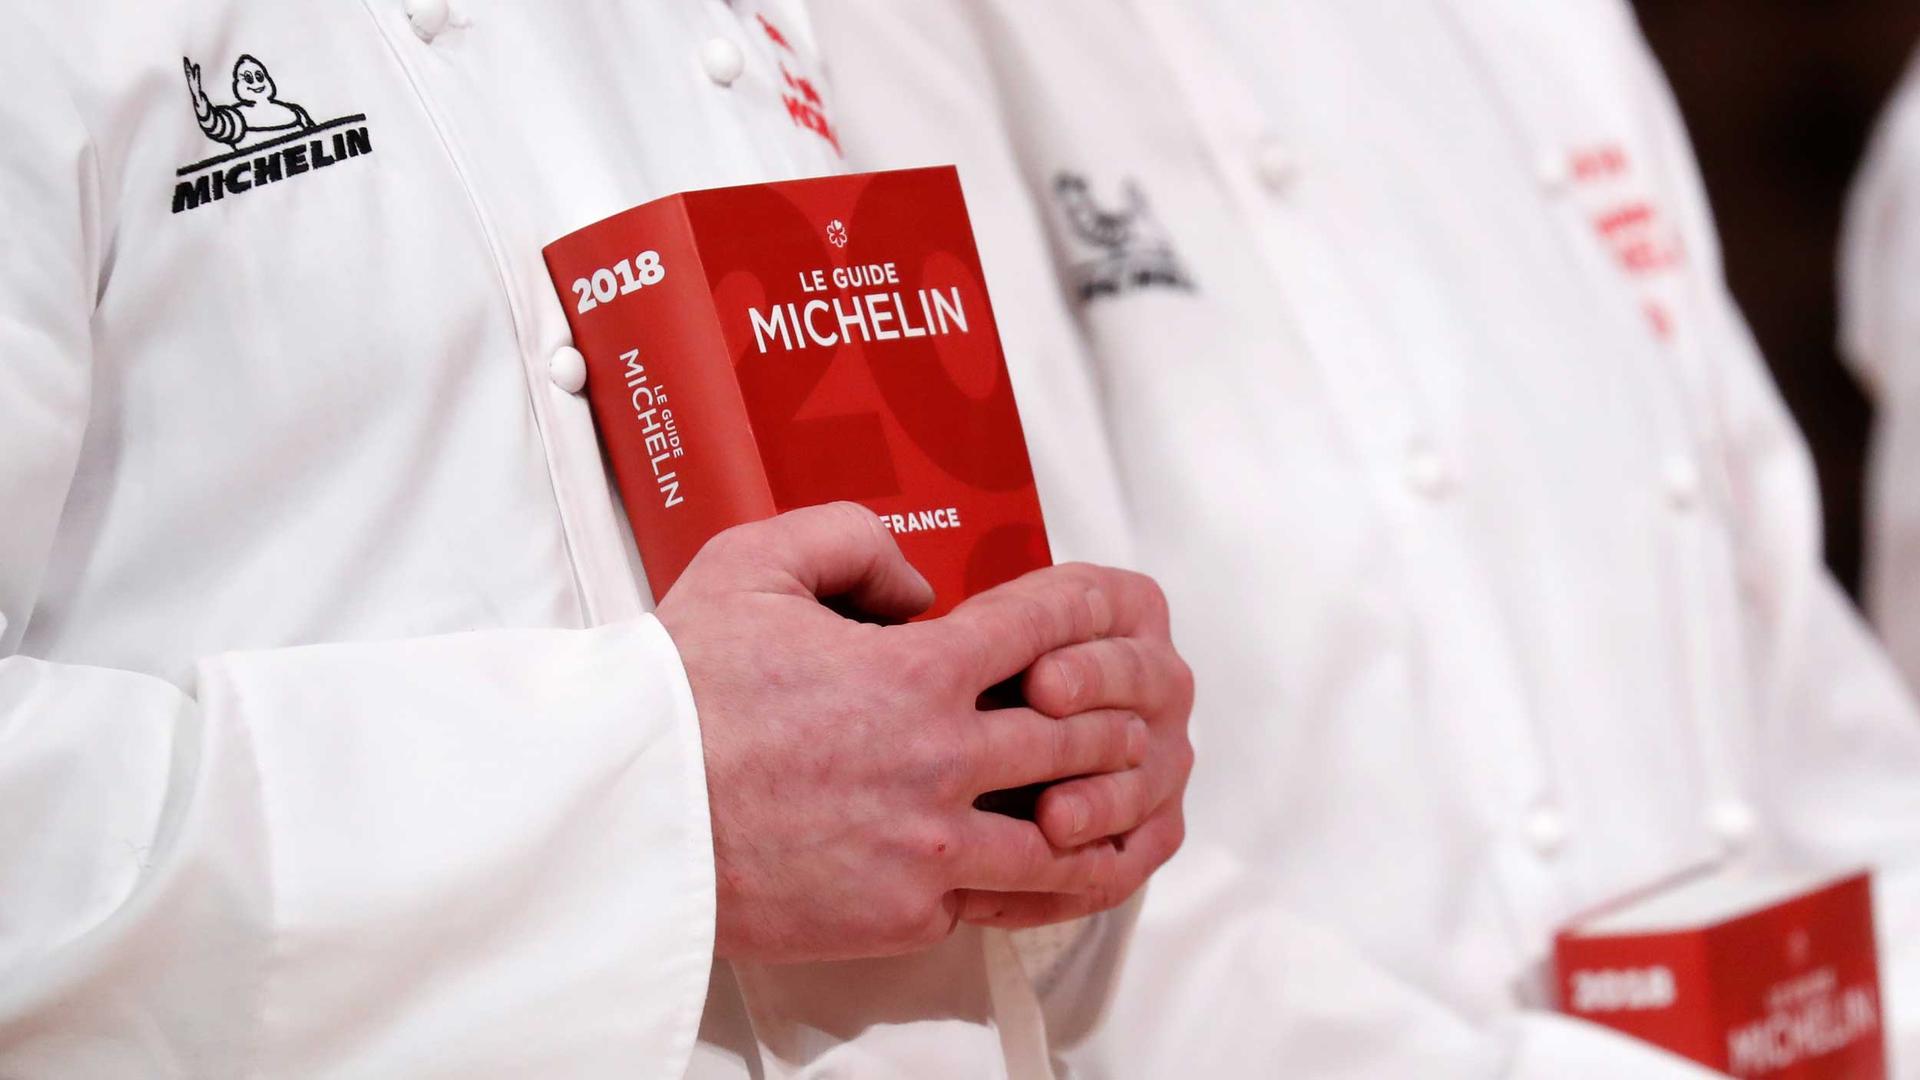 A pair of hands belonging to a person wearing a white chef coat holds a red 2018 Michelin Guide.